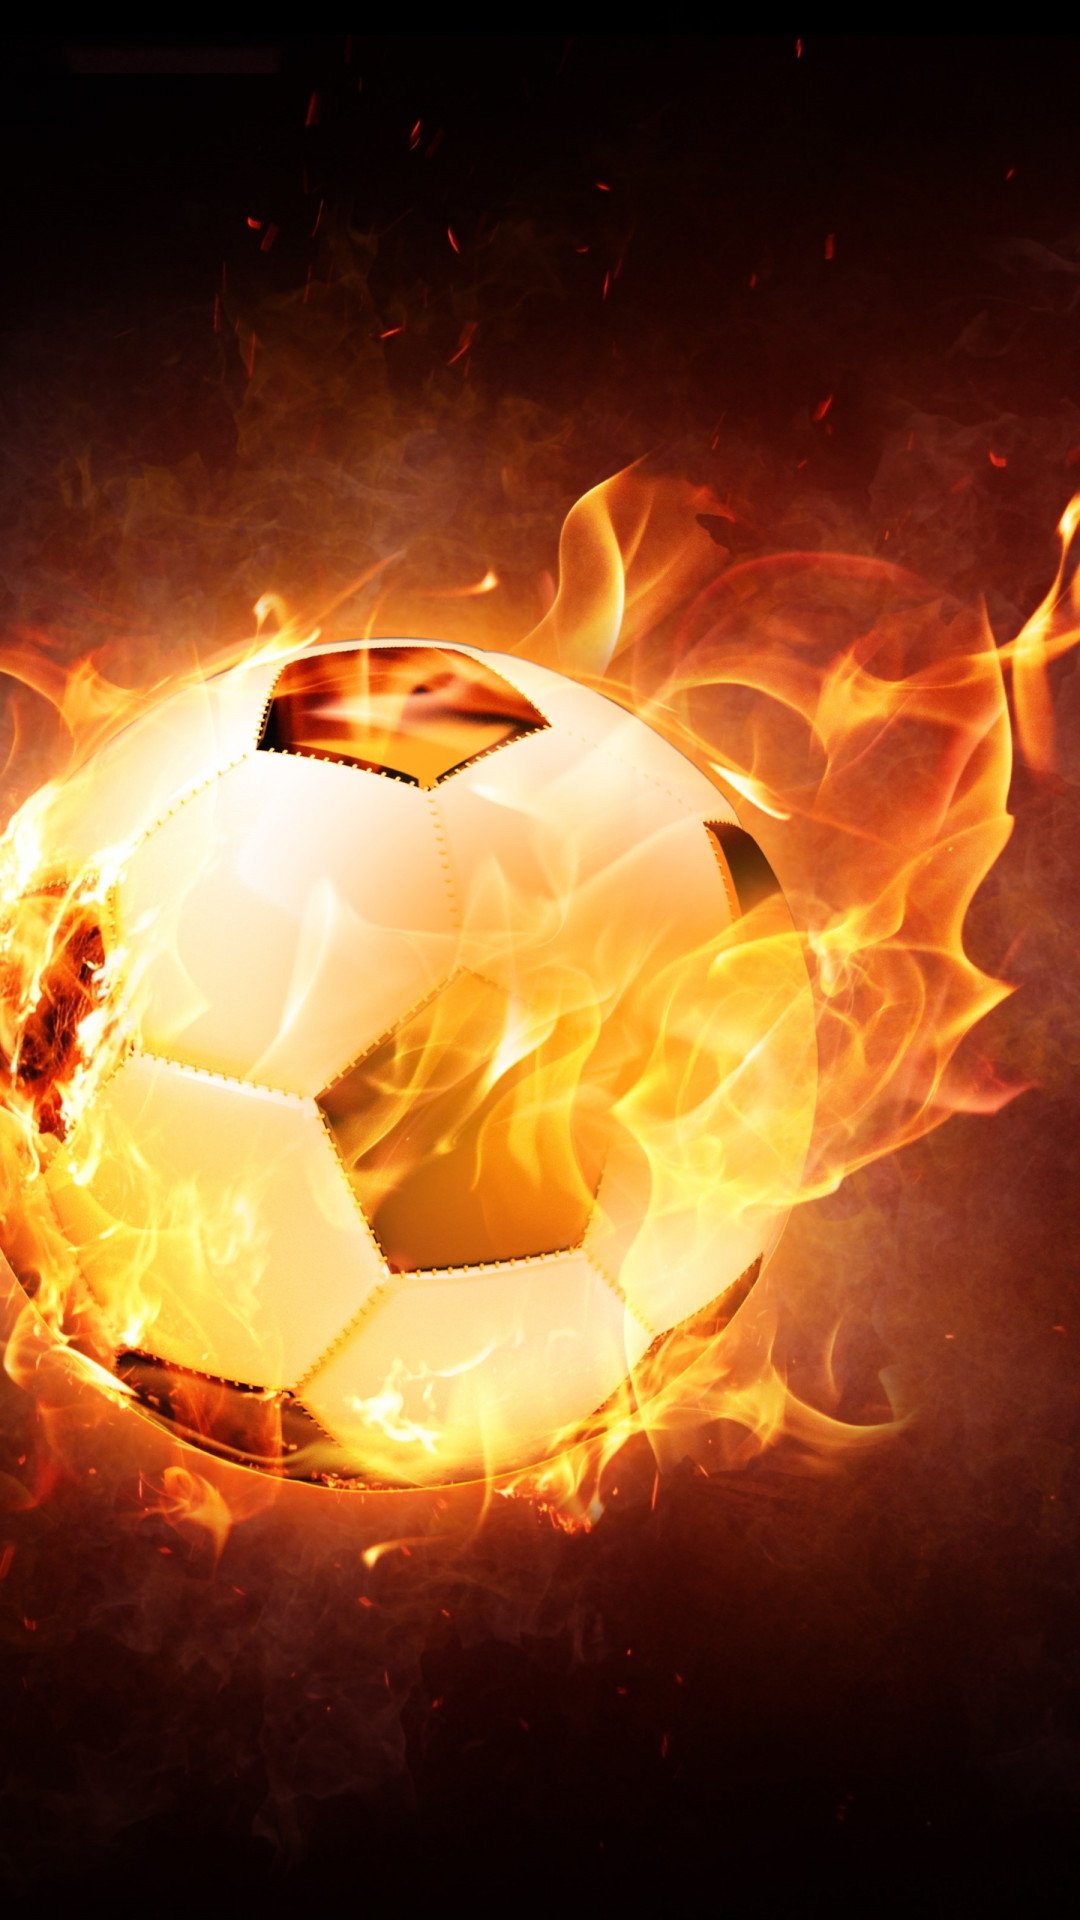 Download wallpaper: The football ball is on fire 1080x1920